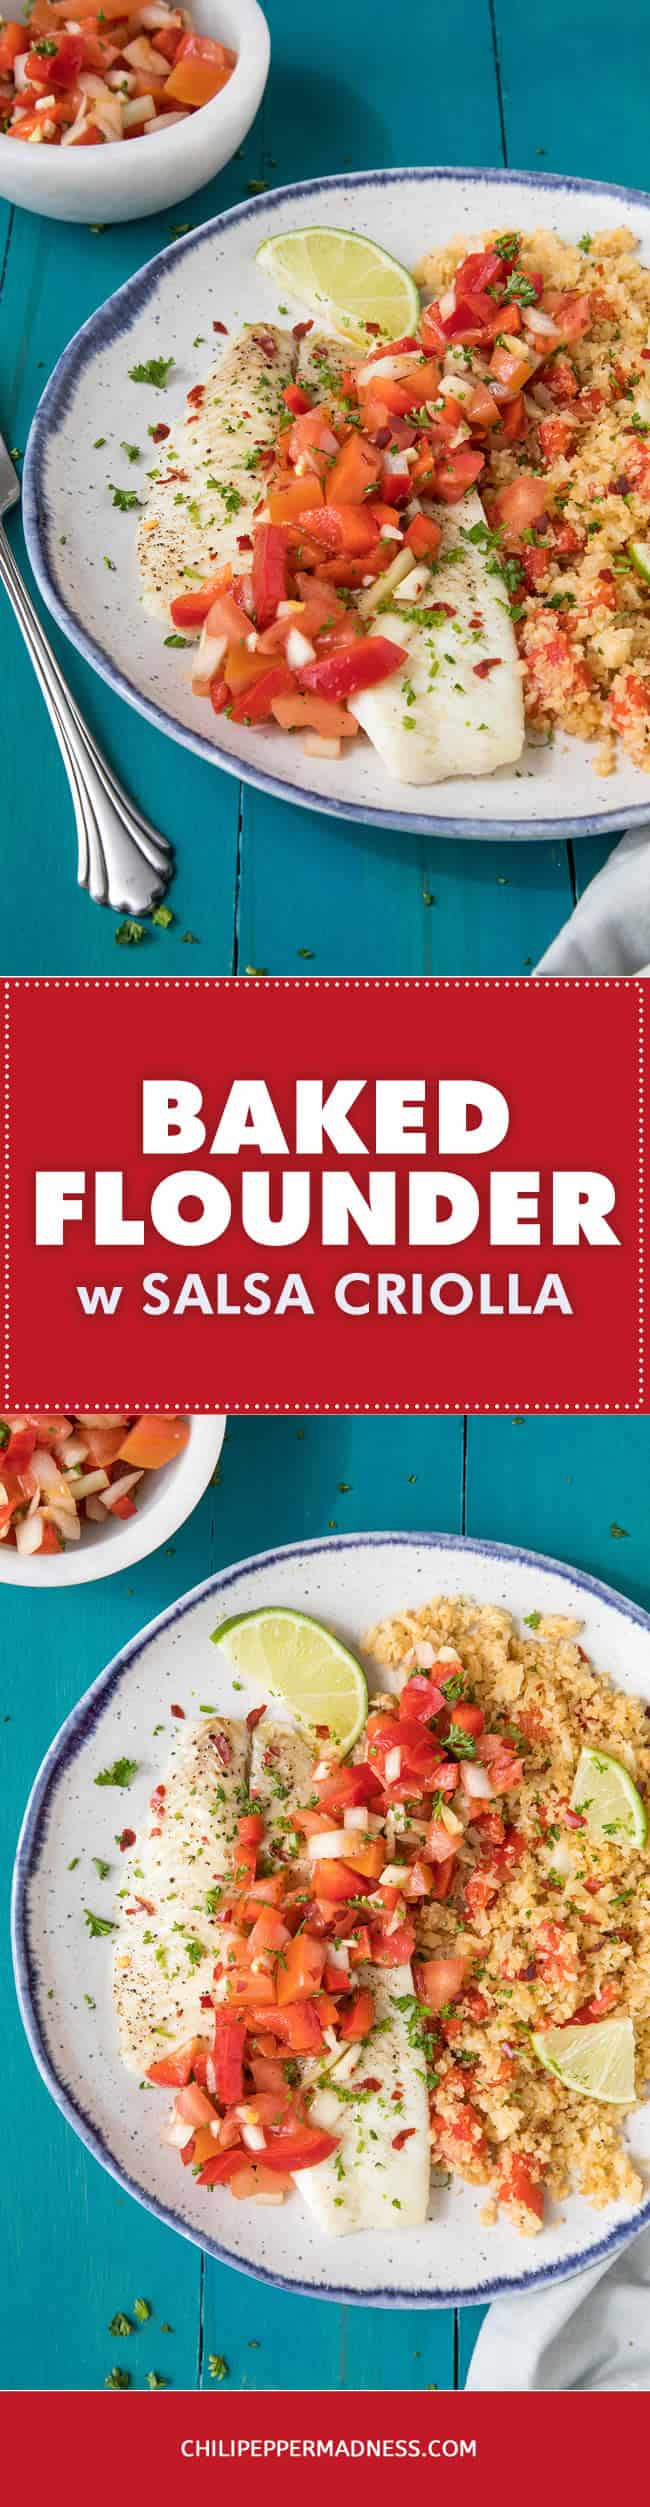 Baked Flounder with Salsa Criolla - Recipe | ChiliPepperMadness.com #flounder #whitefish #lowcalorie #seafood